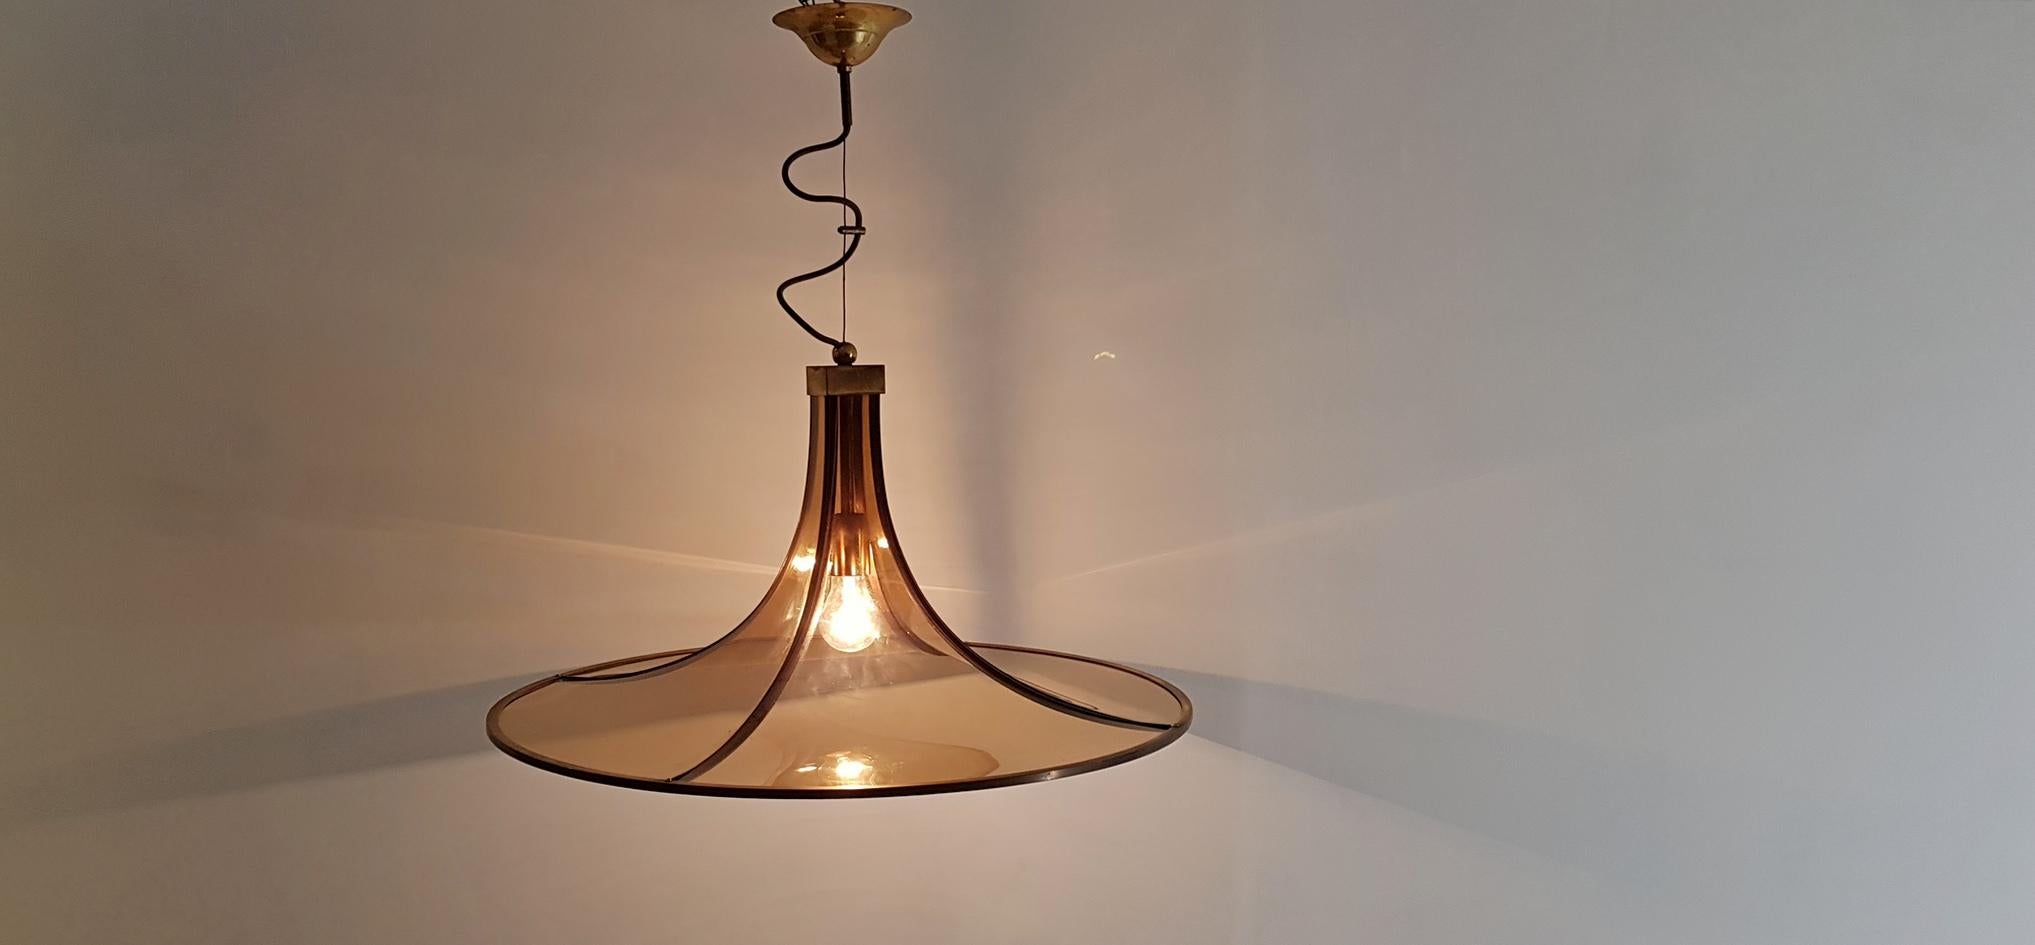 Round pendant lamp by Esperia, Italy with smoke colored glass that gives a warm glow to the room. The glass sits on a brass structure and it uses E40 lightbulbs. Works in the US as well as Europe. The height can be varied with the steel wire. The